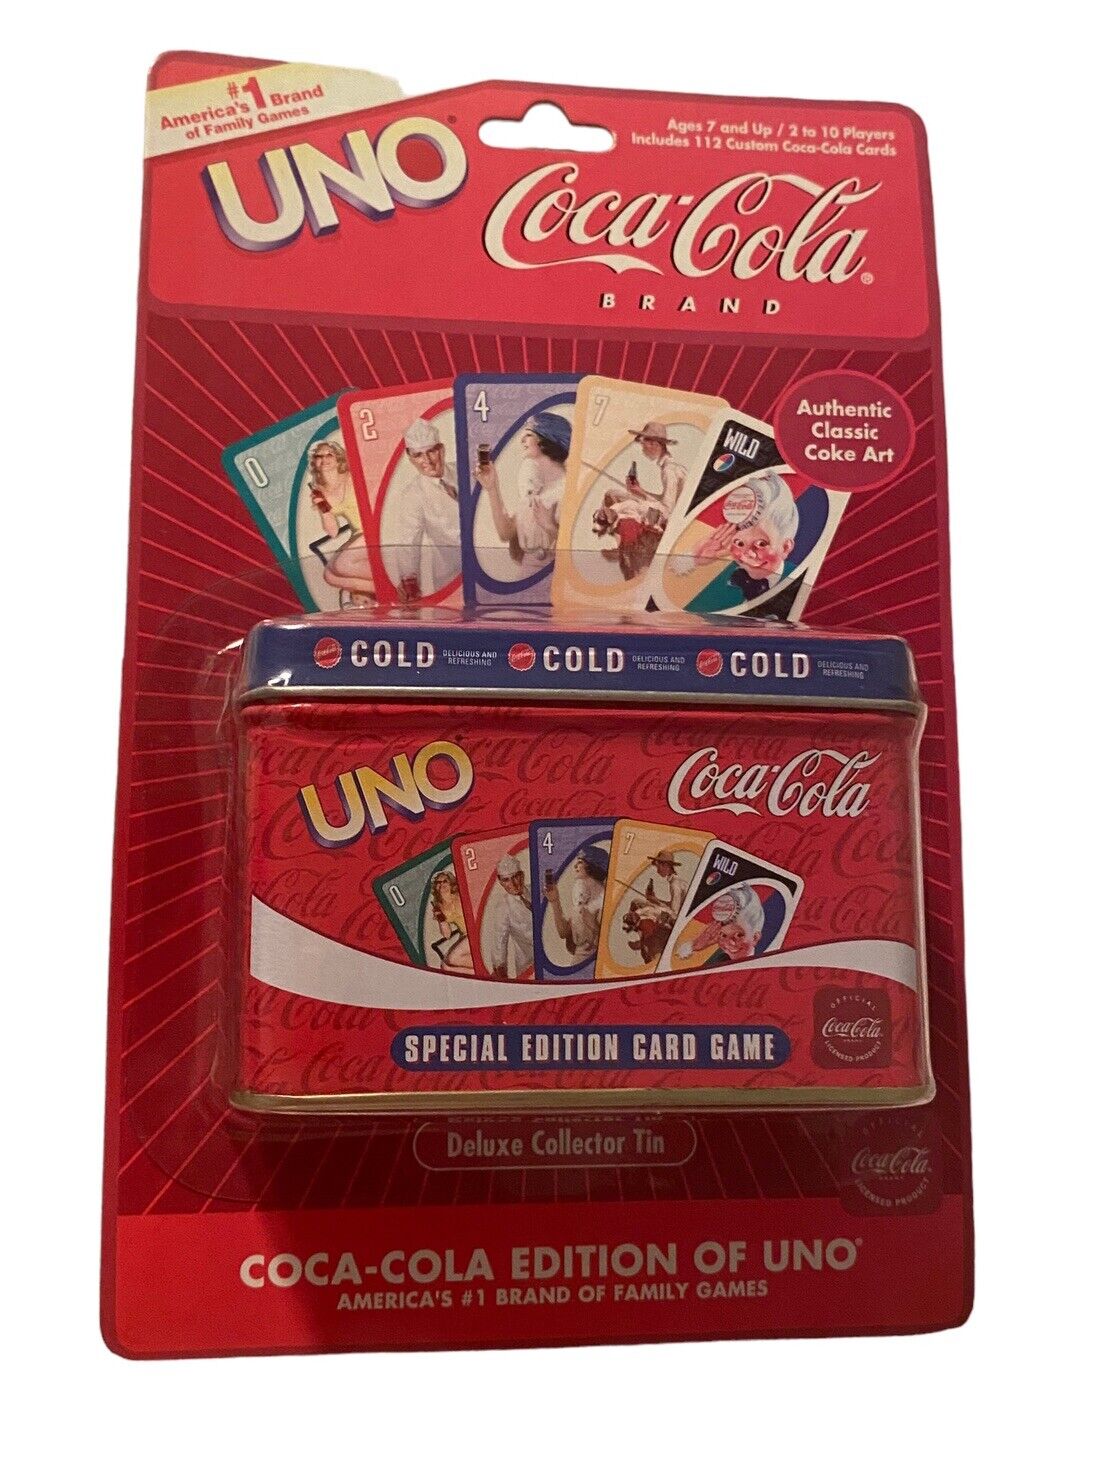 Coca Cola Uno Special Edition Card Game In a Deluxe Collector Tin Sababa Toy New